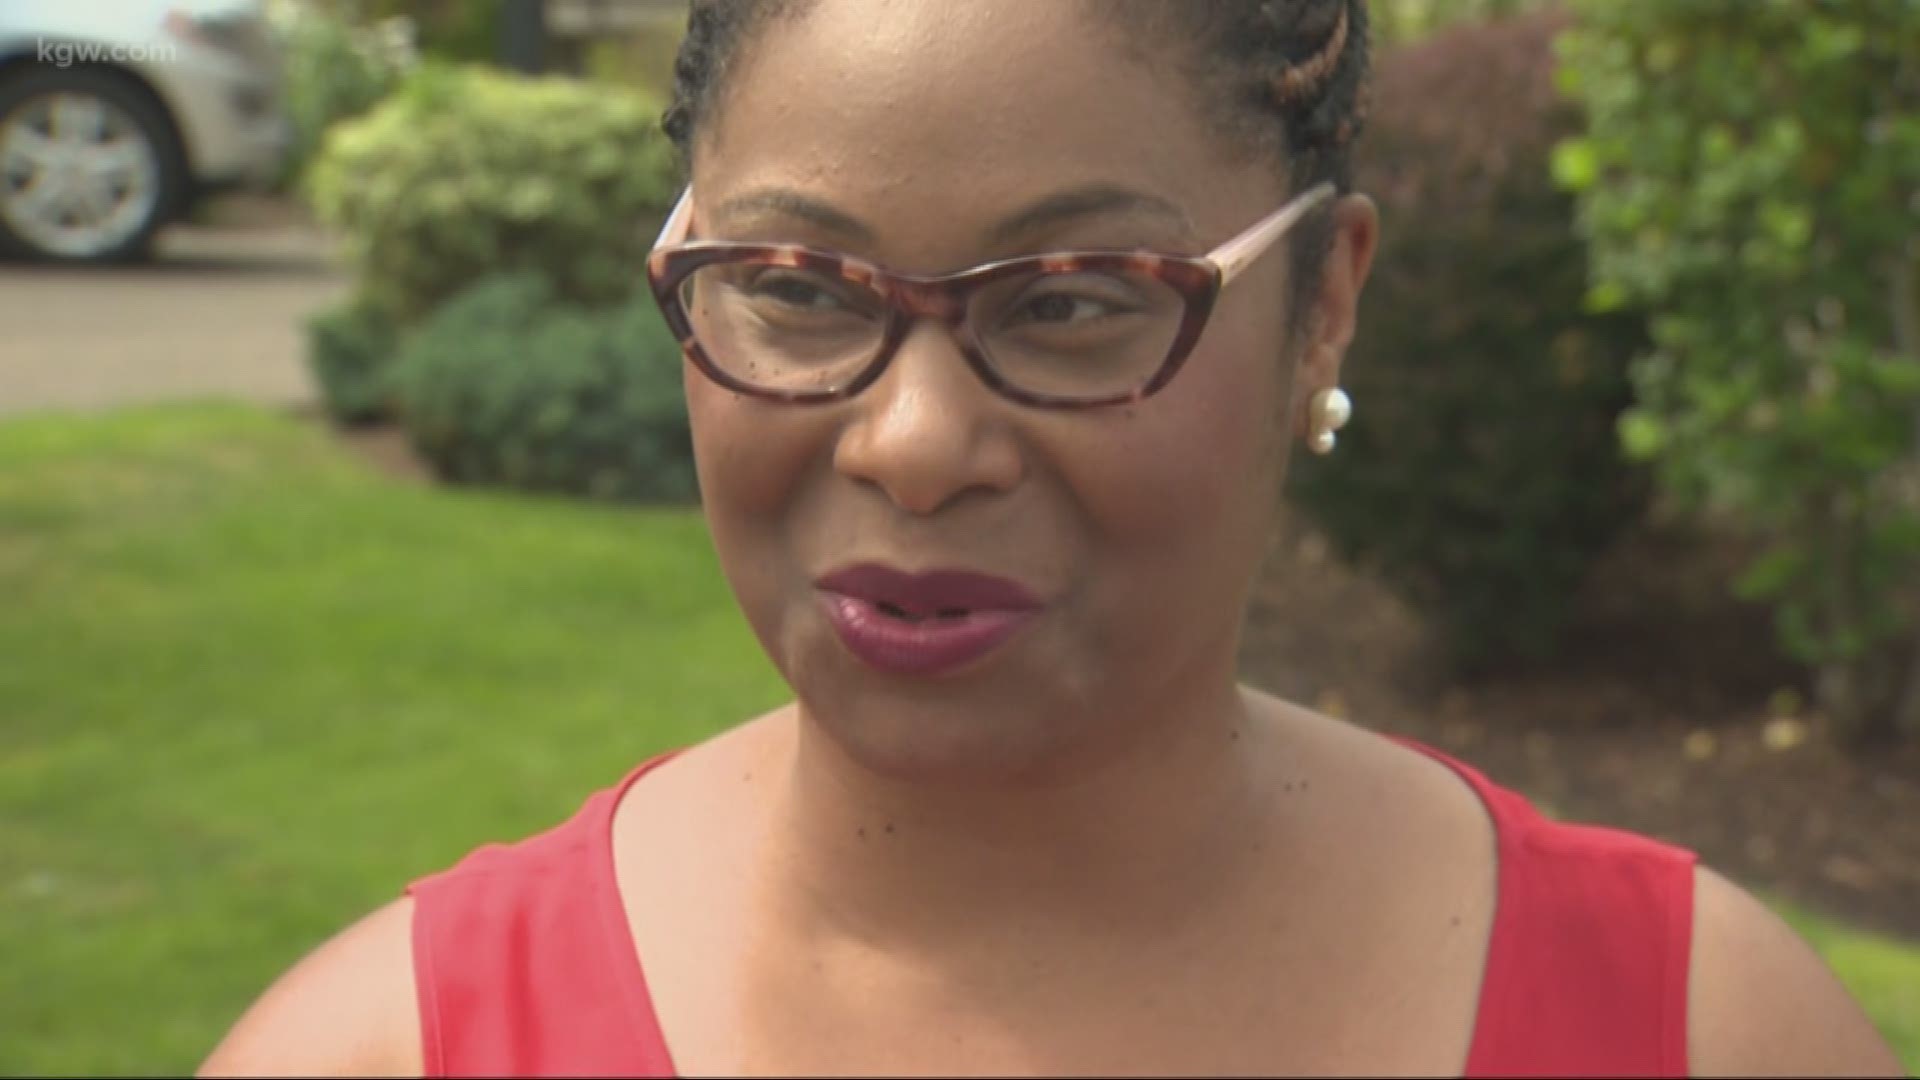 A black Oregon legislator says a constituent called the police because she looked "suspicious" while canvassing in her district.